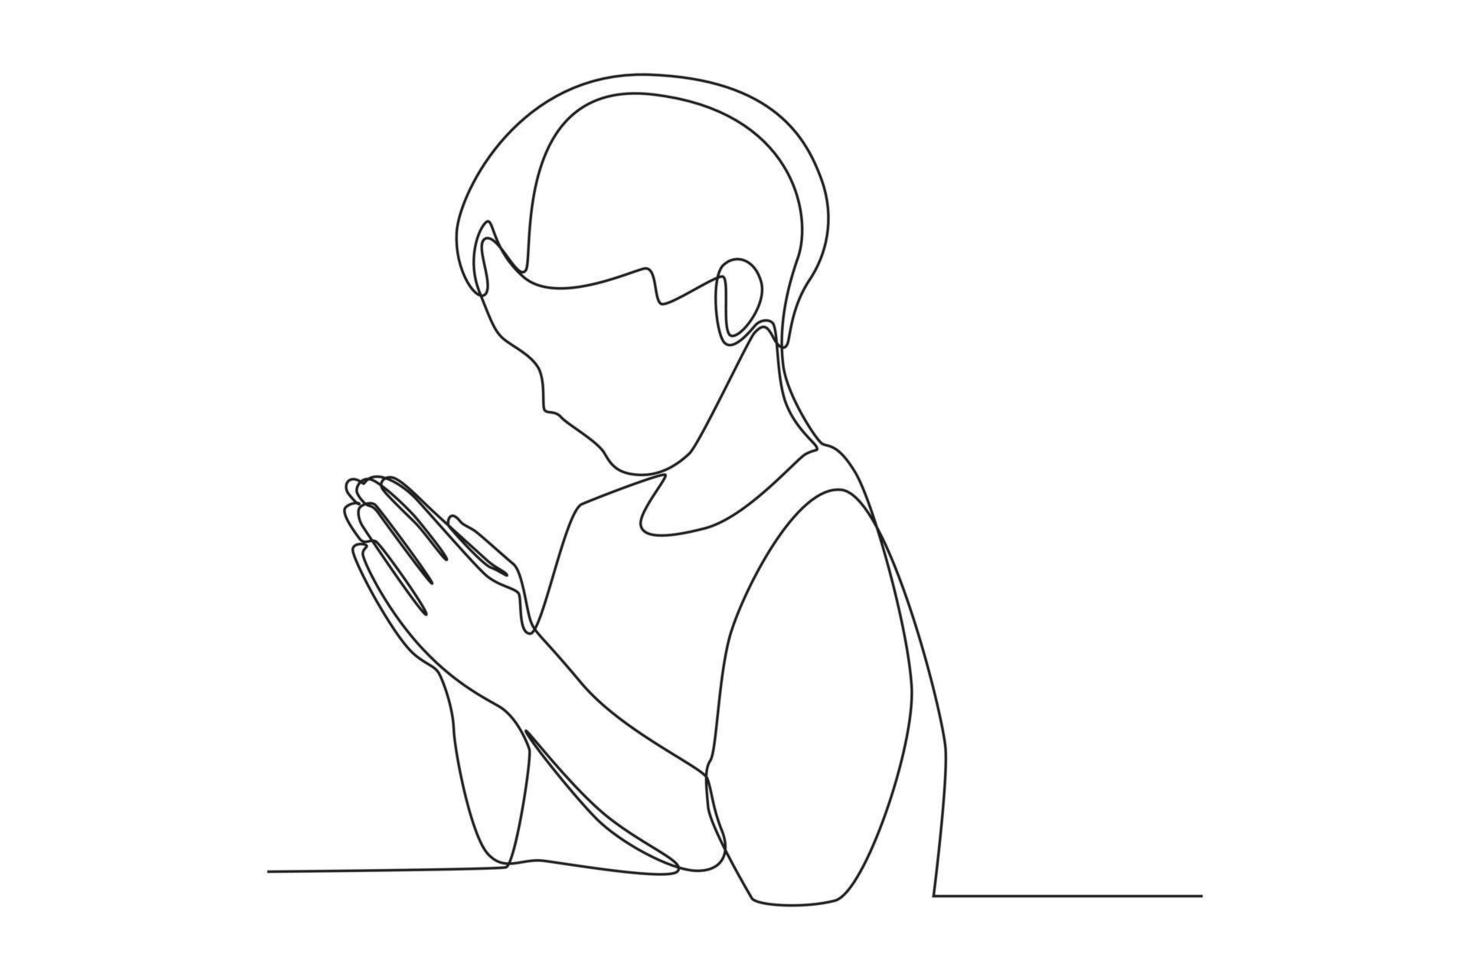 Continuous one line drawing little boy praying for world peace. Peace day concept. Single line draw design vector graphic illustration.